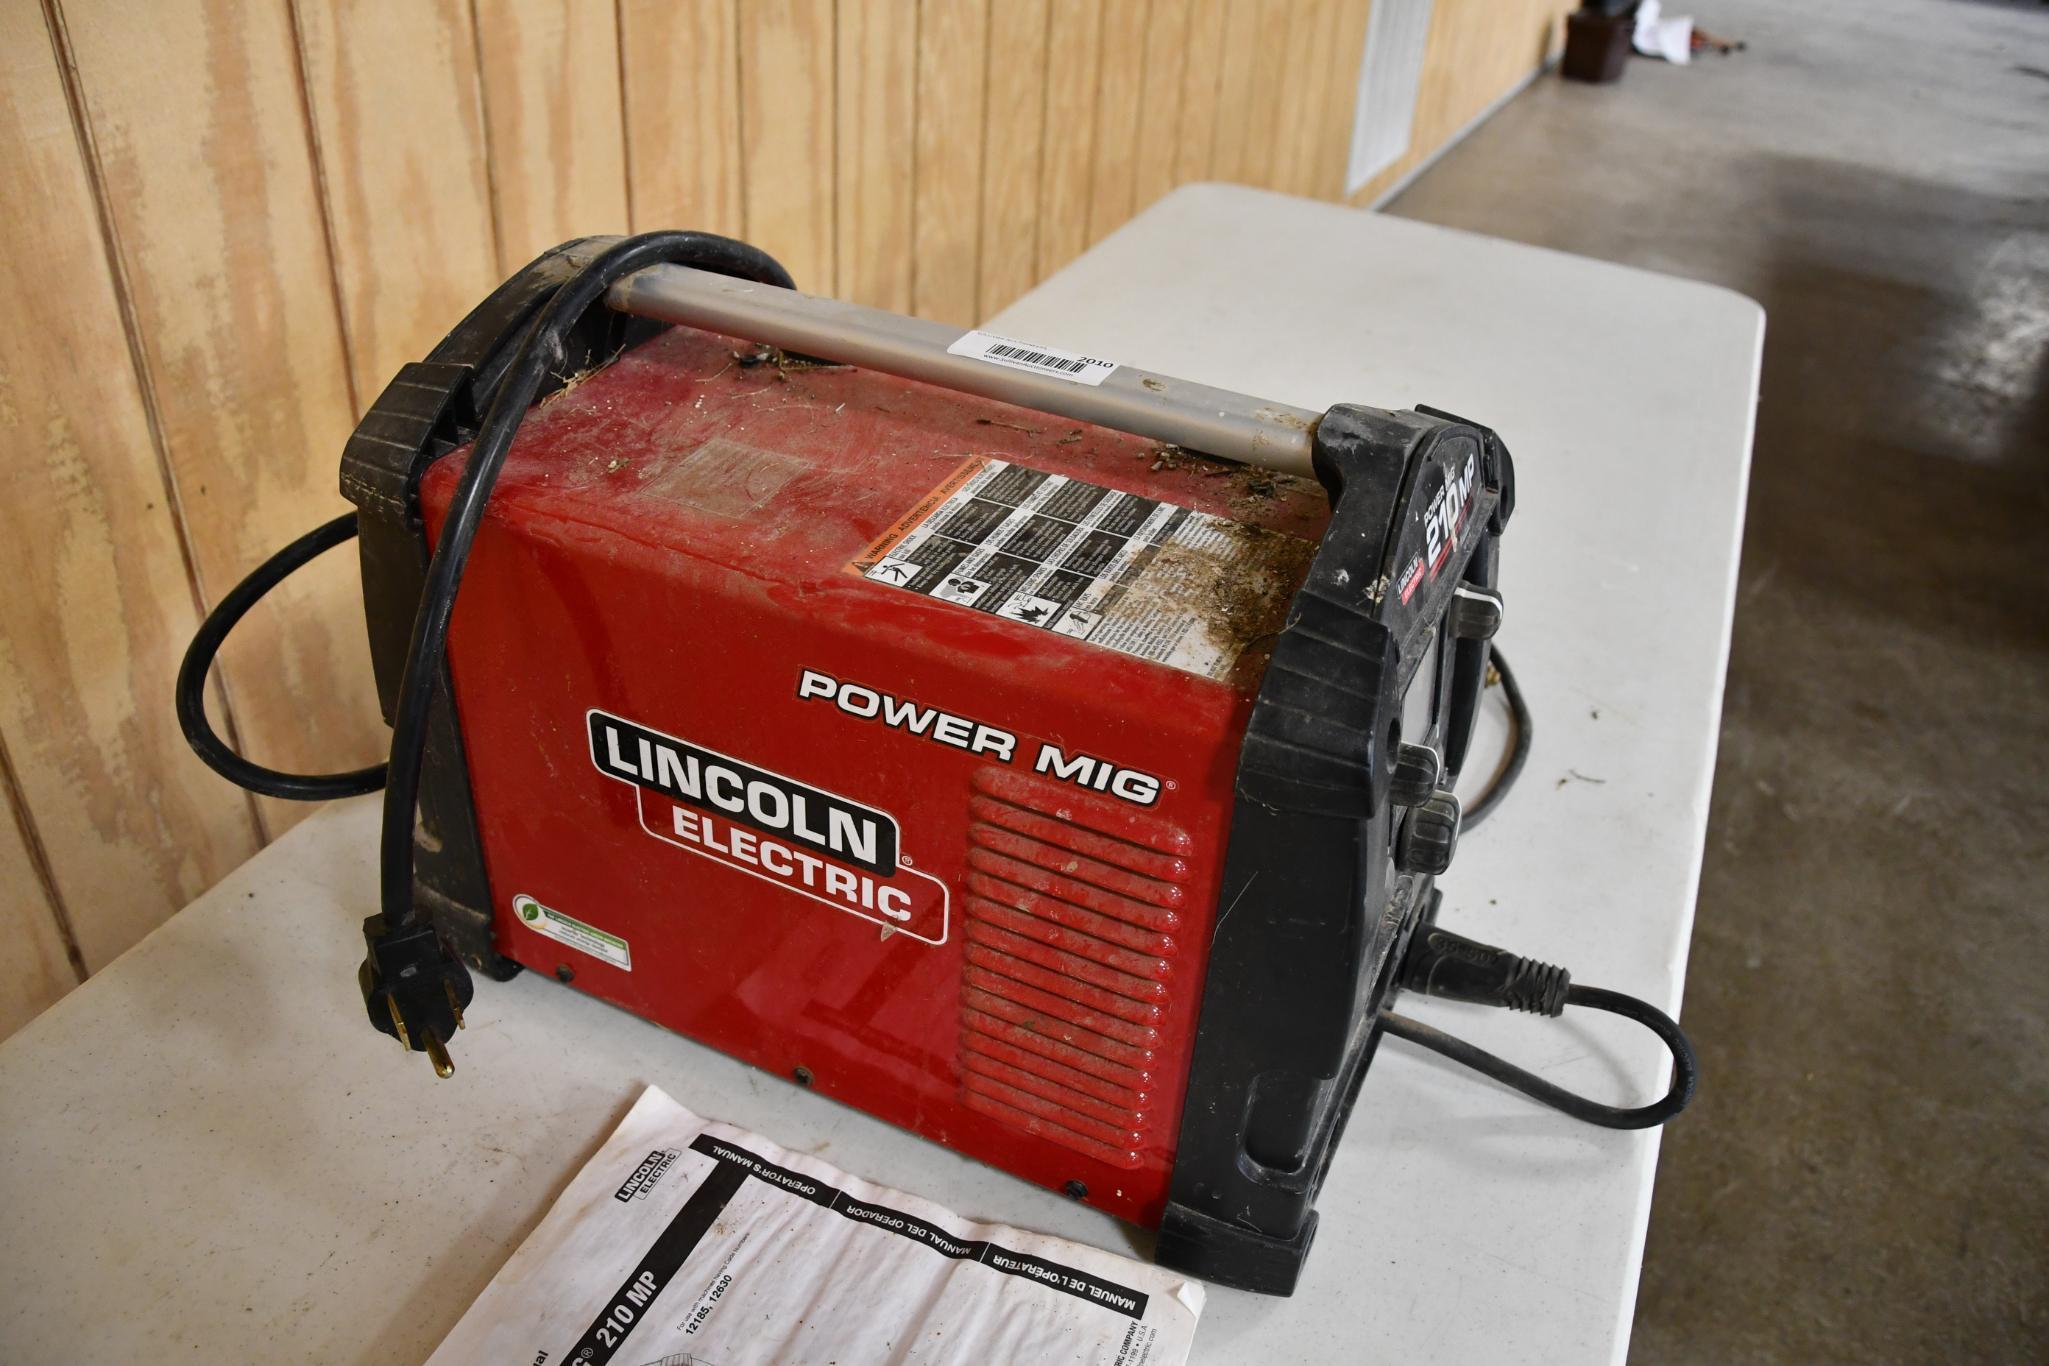 Lincoln Power Mig 210 MP electric power mig welder